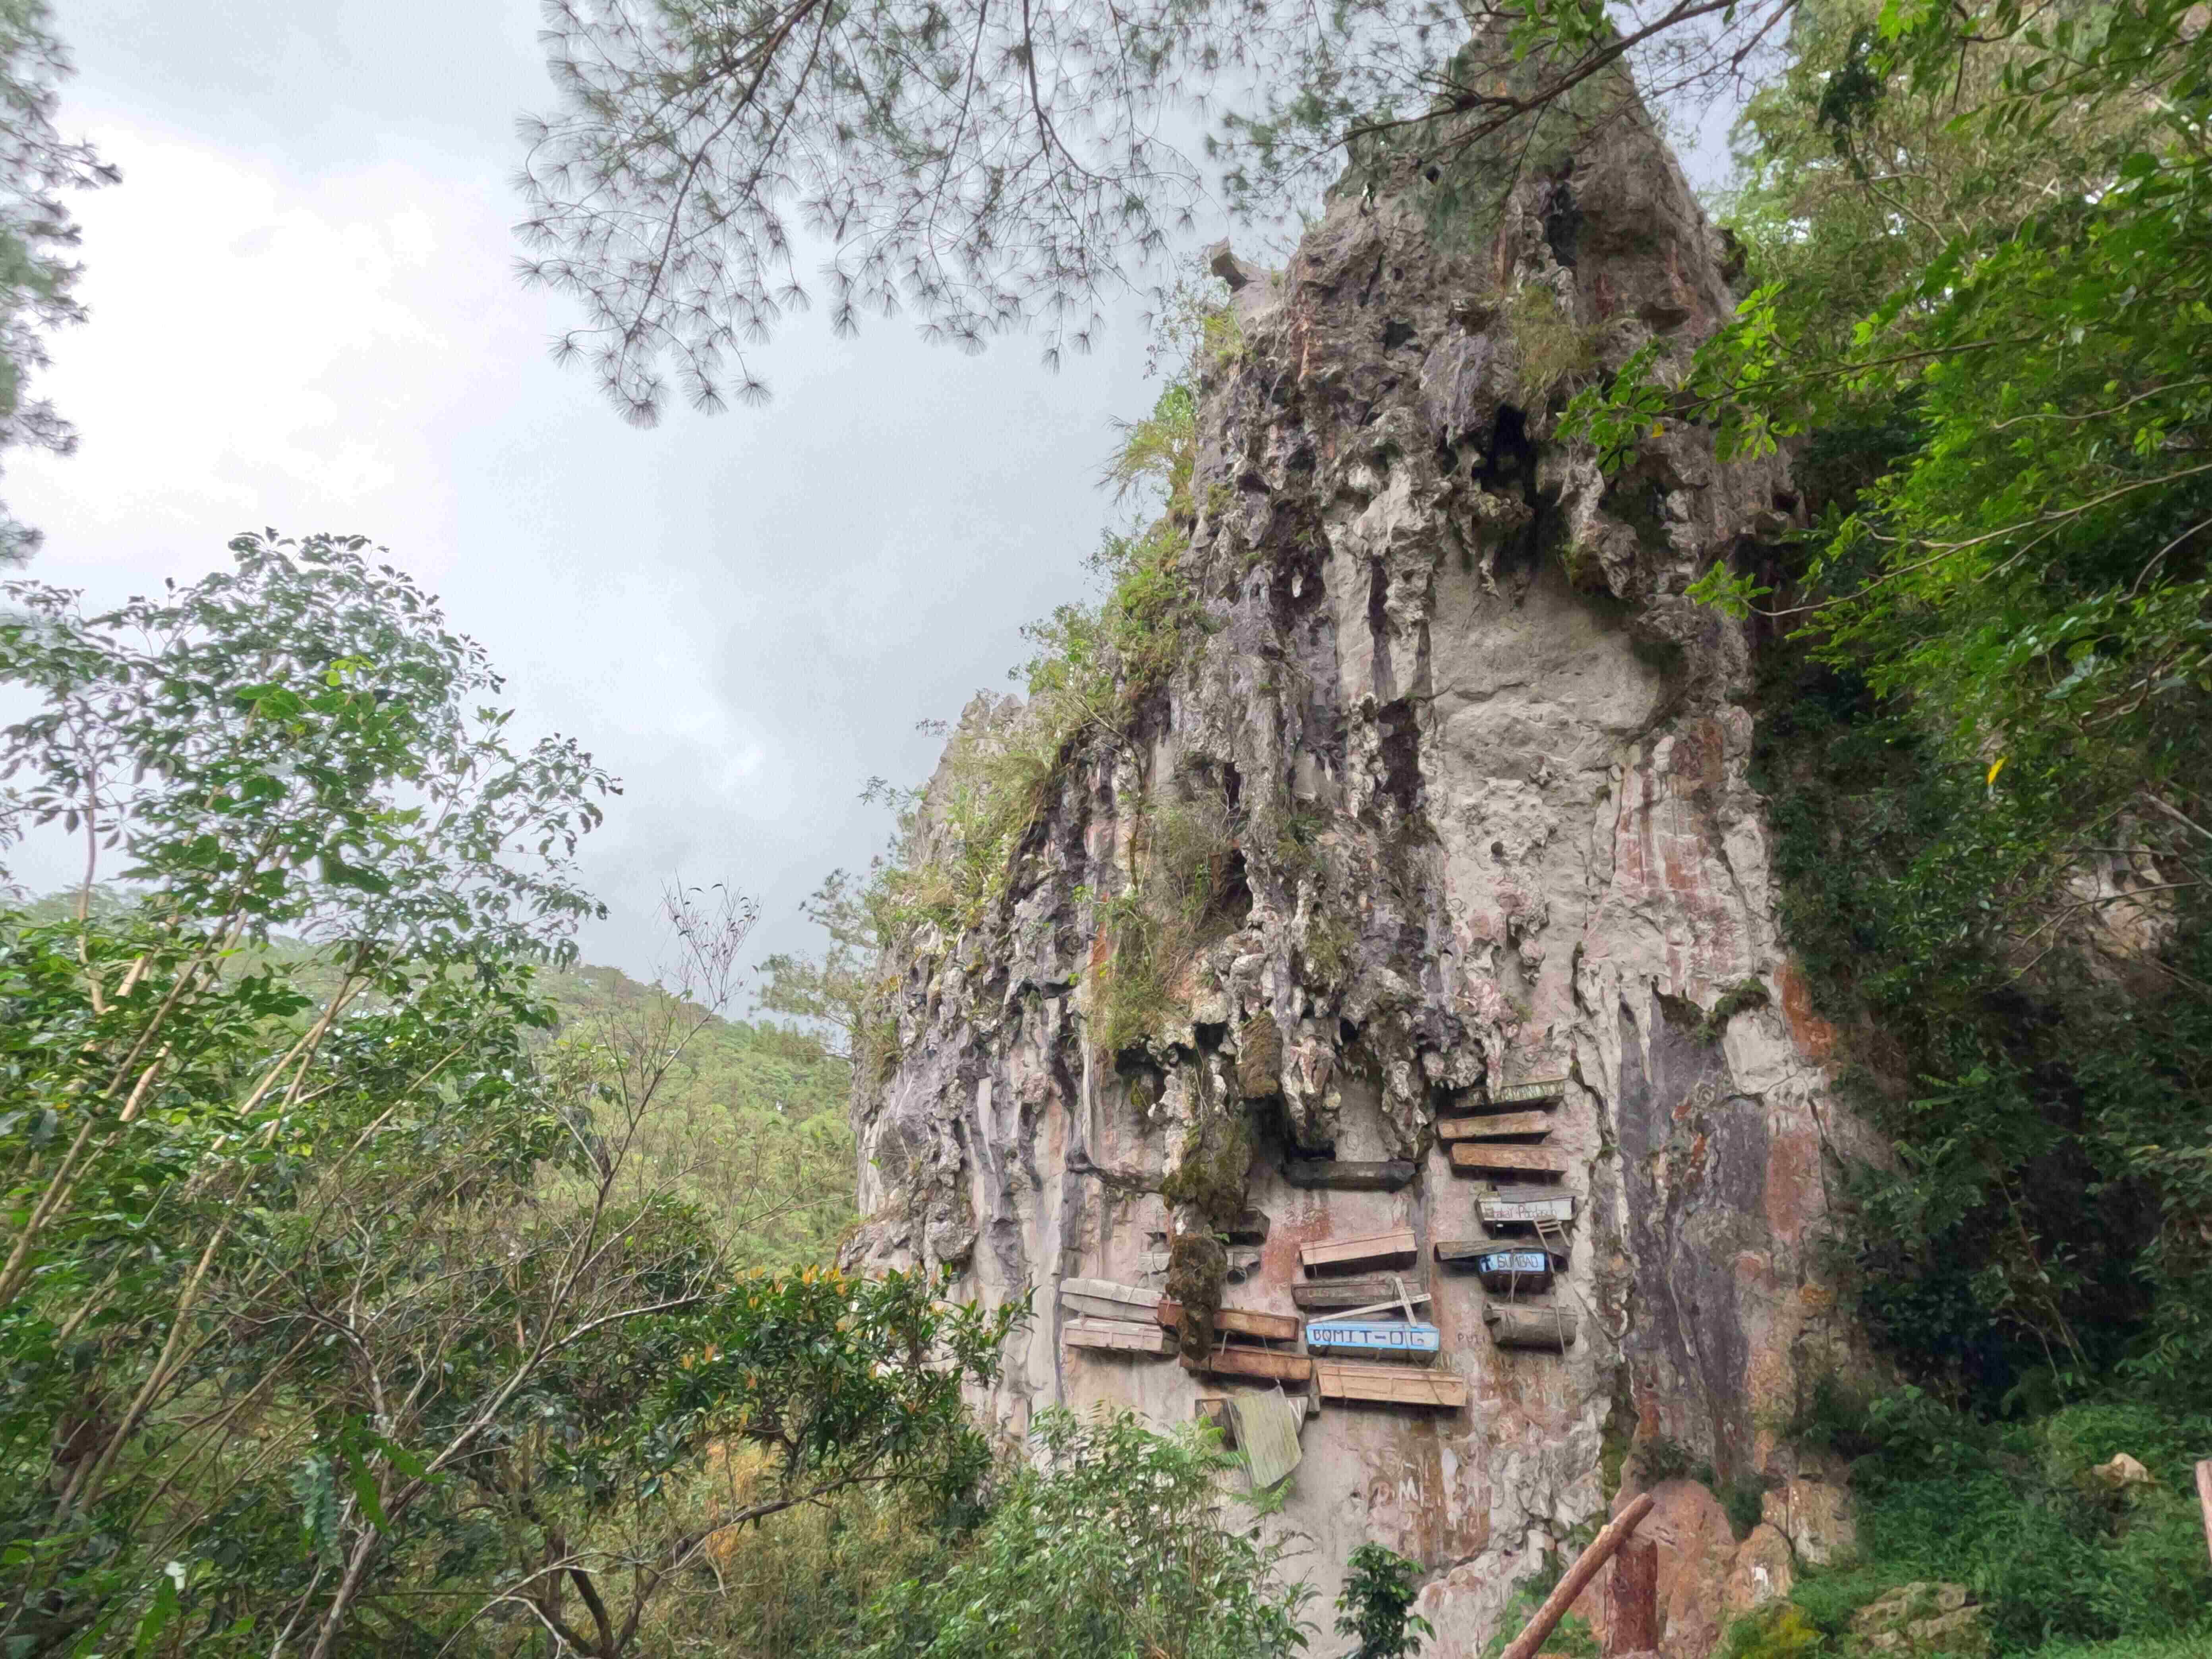 Hanging wooden coffins secured to the cliff face in Sagada, Philippines.